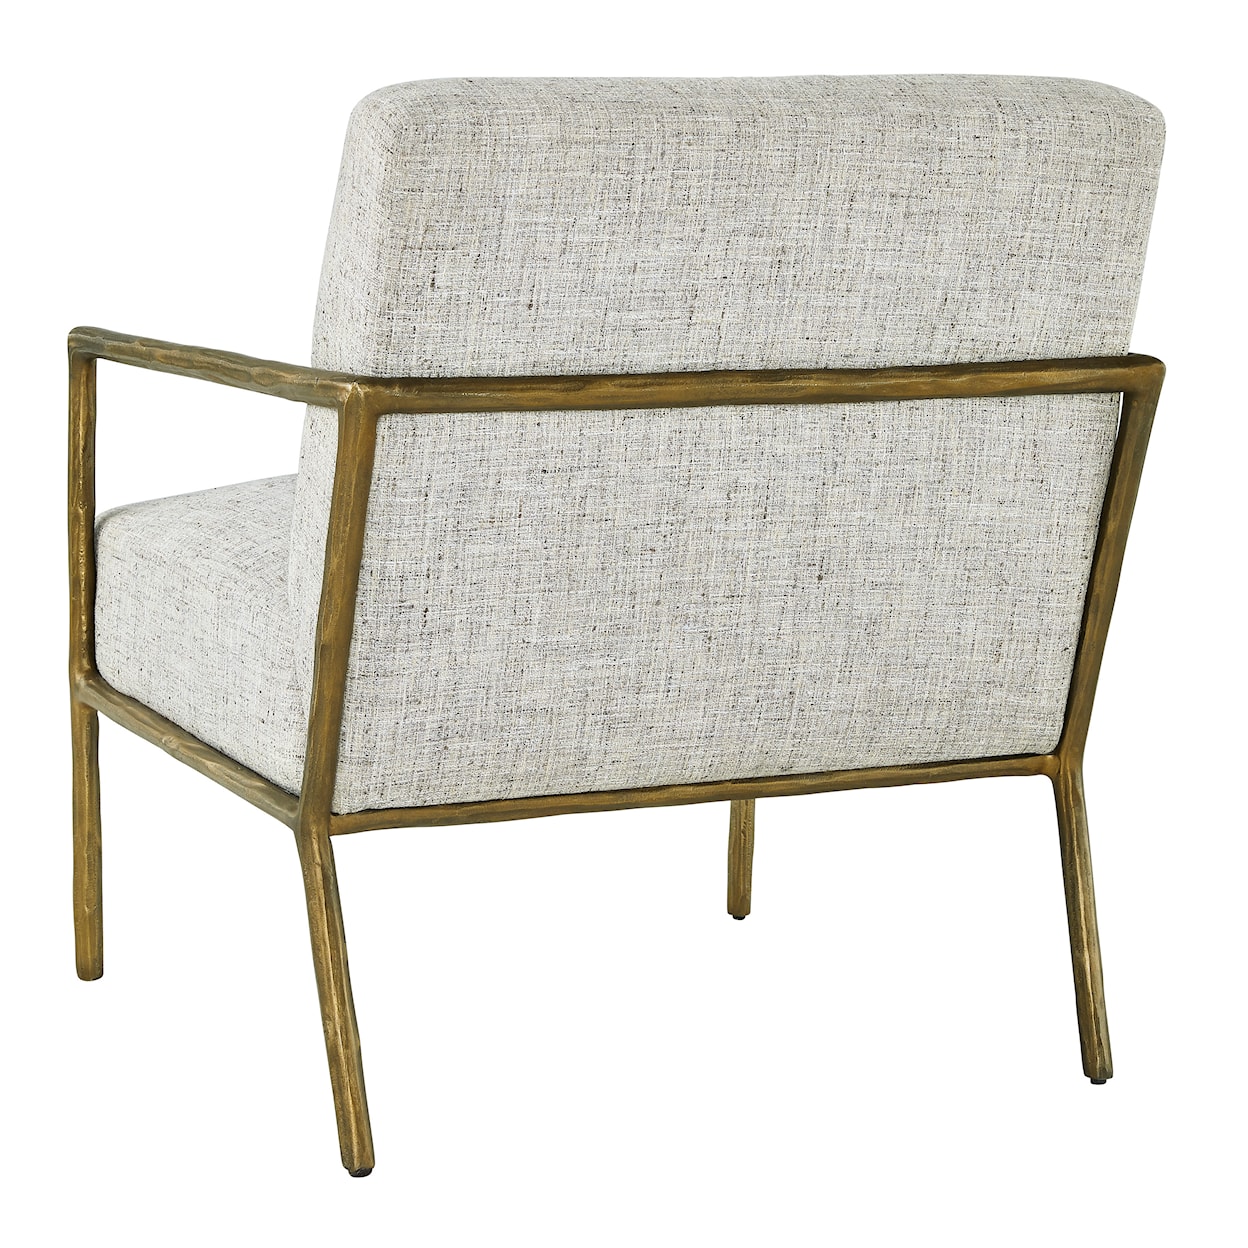 Signature Design by Ashley Furniture Riana Accent Chair